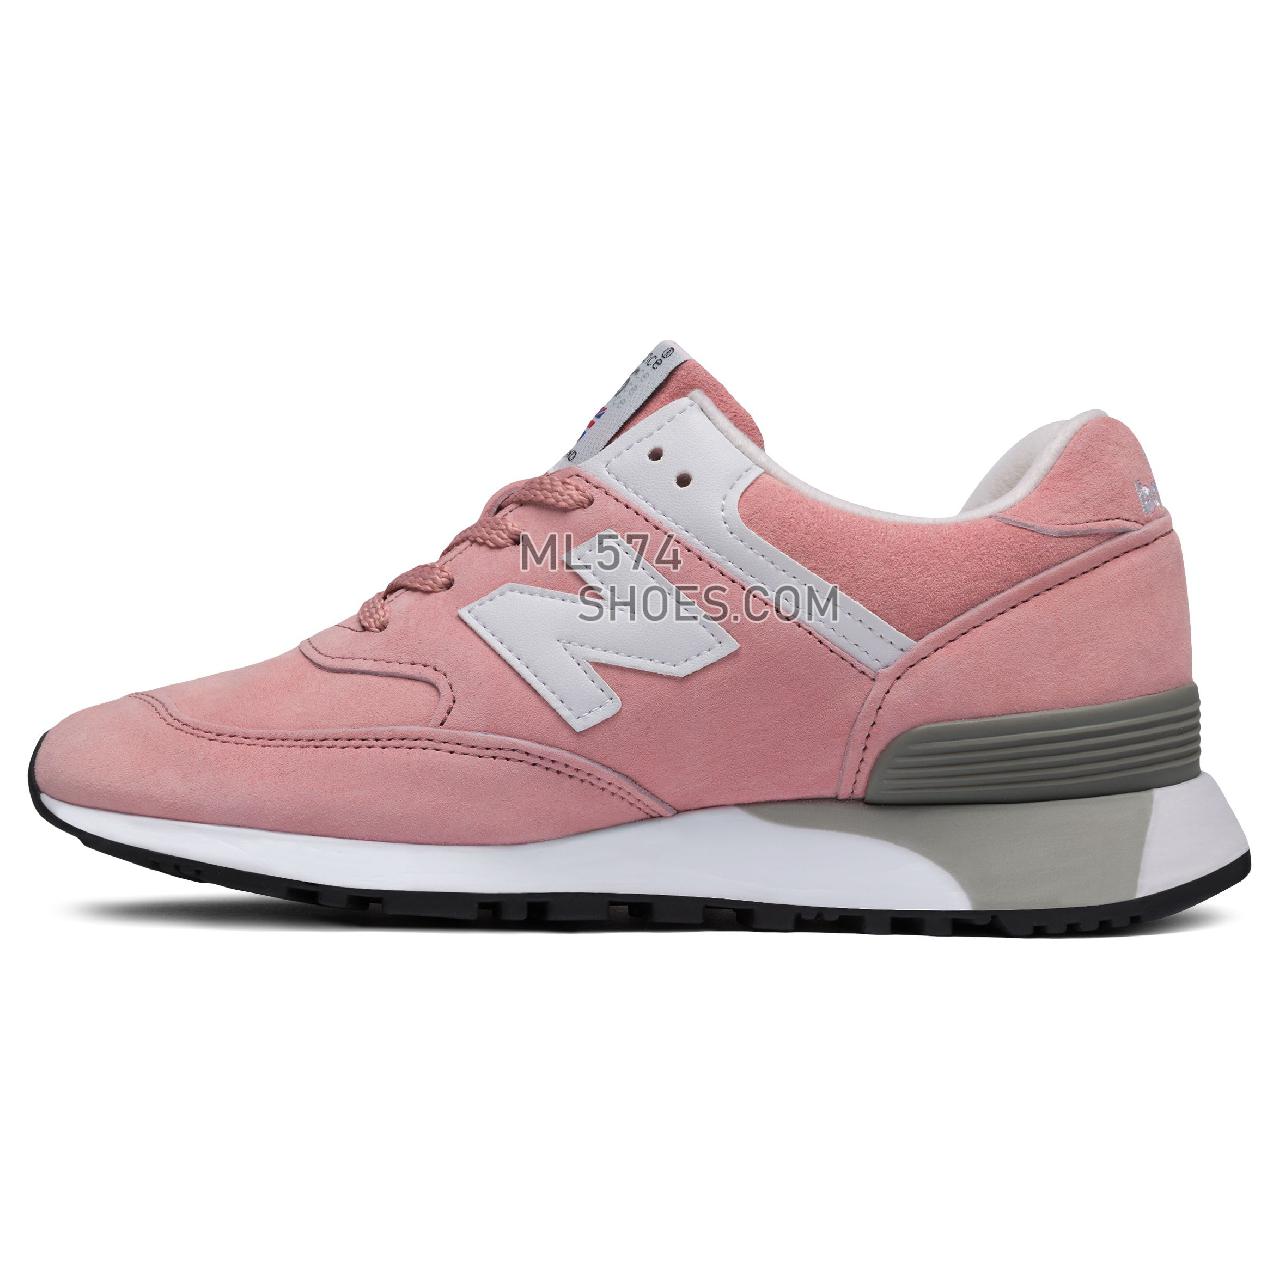 New Balance 576 Made in UK - Men's 576 Made in UK Classic W576-PS3 - Faded Rose with White - W576PNK